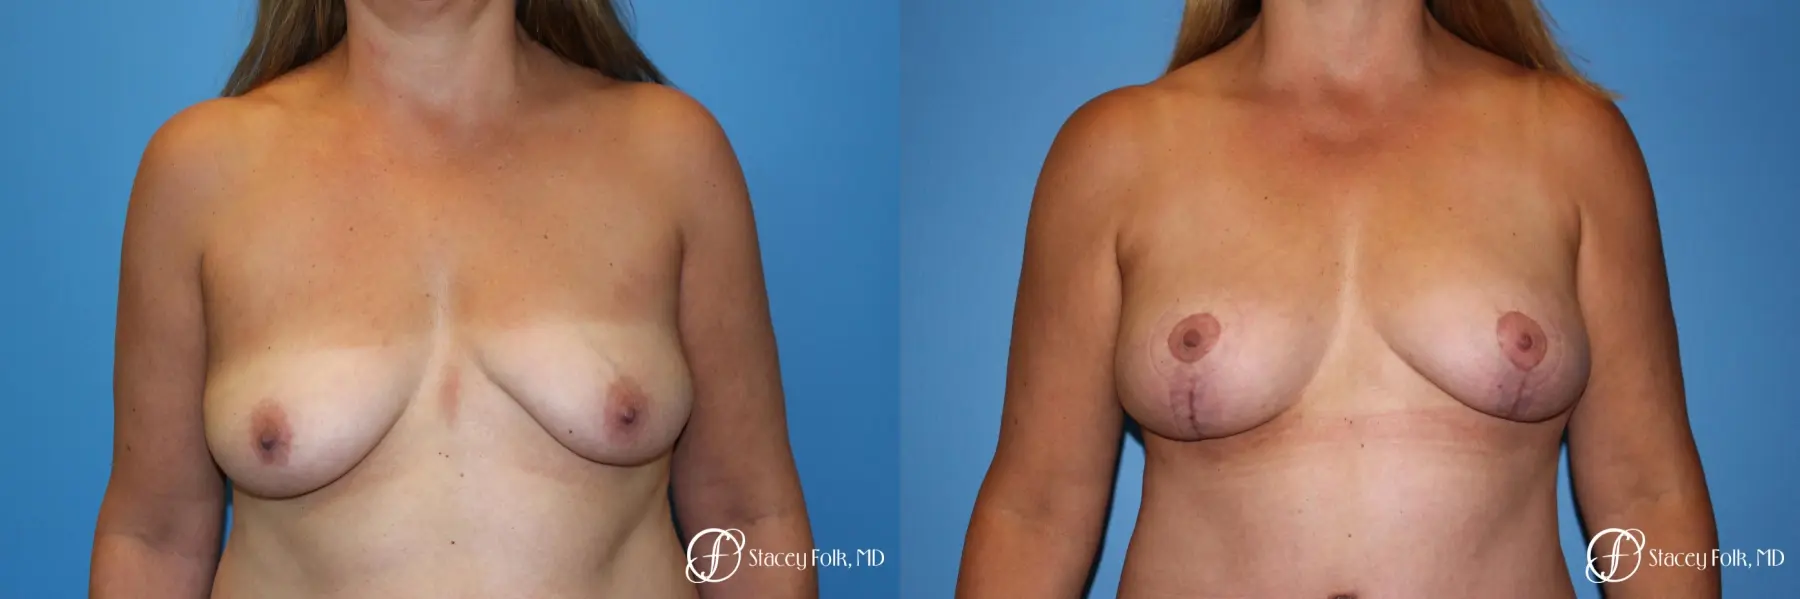 Denver Fat Transfer Breast Lift Mastopexy with Fat Transfer to the Breast 6920 - Before and After 1